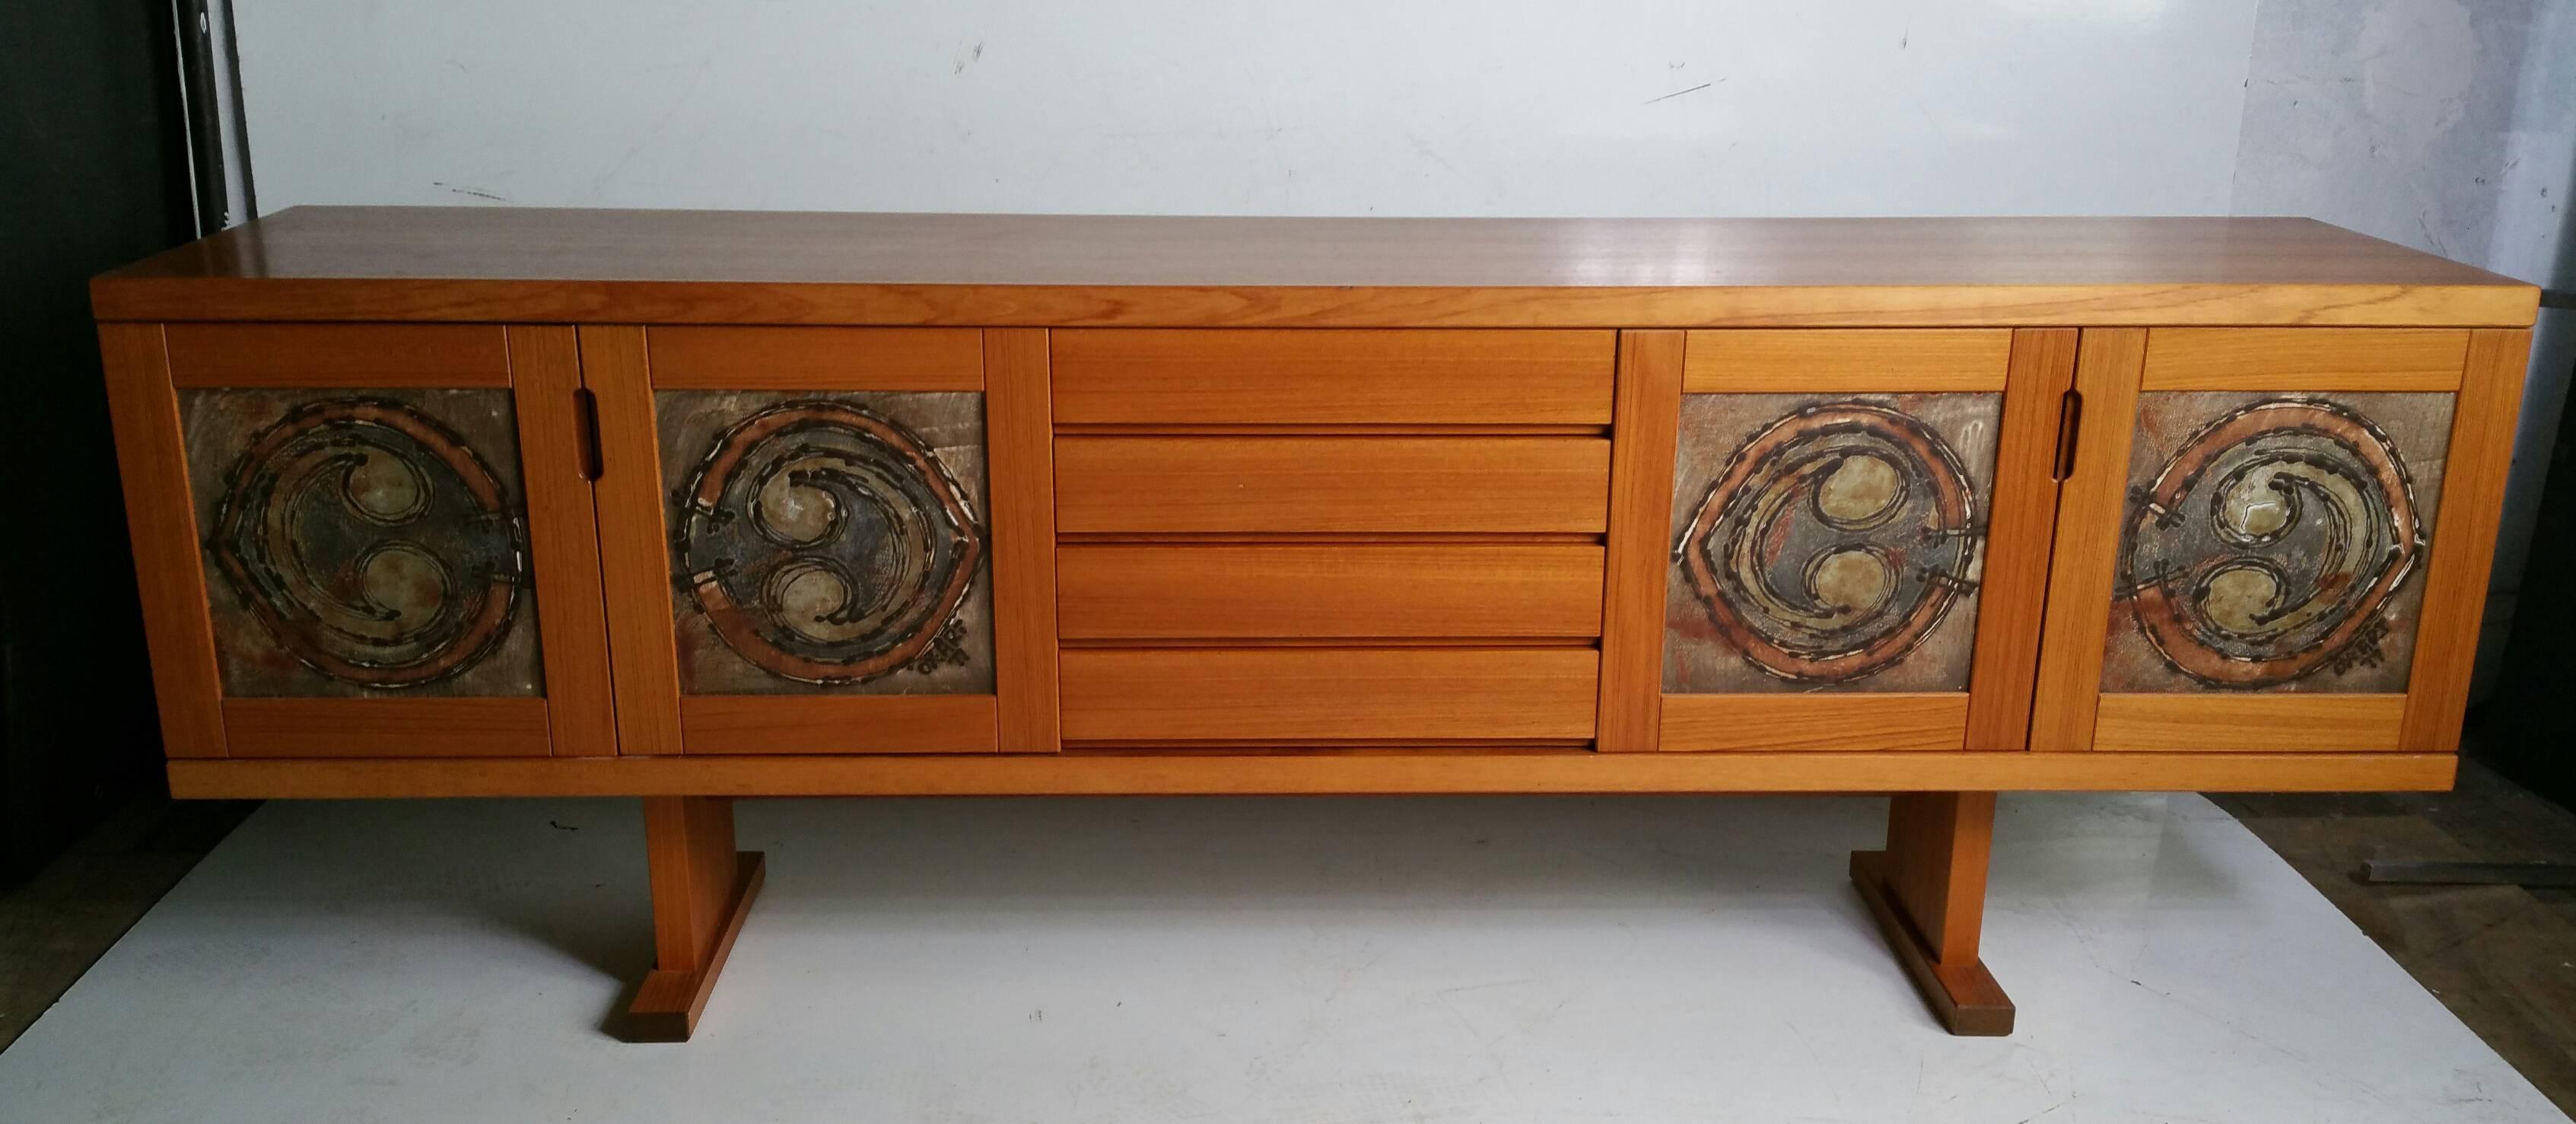 Danish crafts movement sideboard or credenza, manufactured by Gangso Mobler, wonderful large Ox Art tiles to door fronts. Generous storage behind two left and two right doors, four drawers (center), beautifully grained teakwood, finished back.